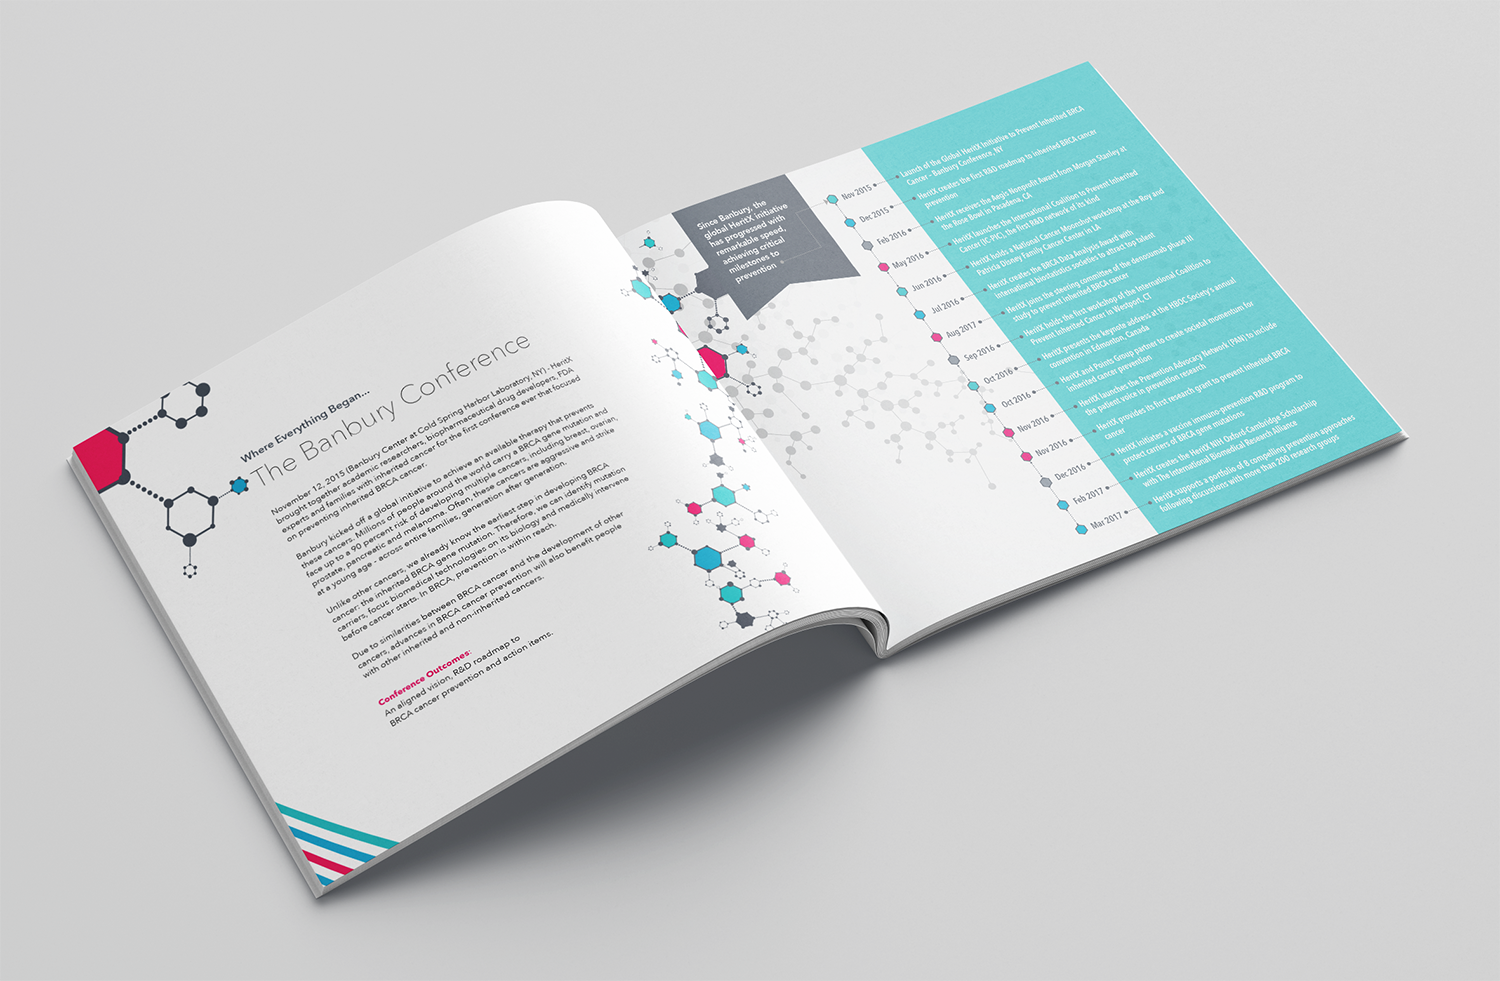 A mockup of a brochure created for a conference